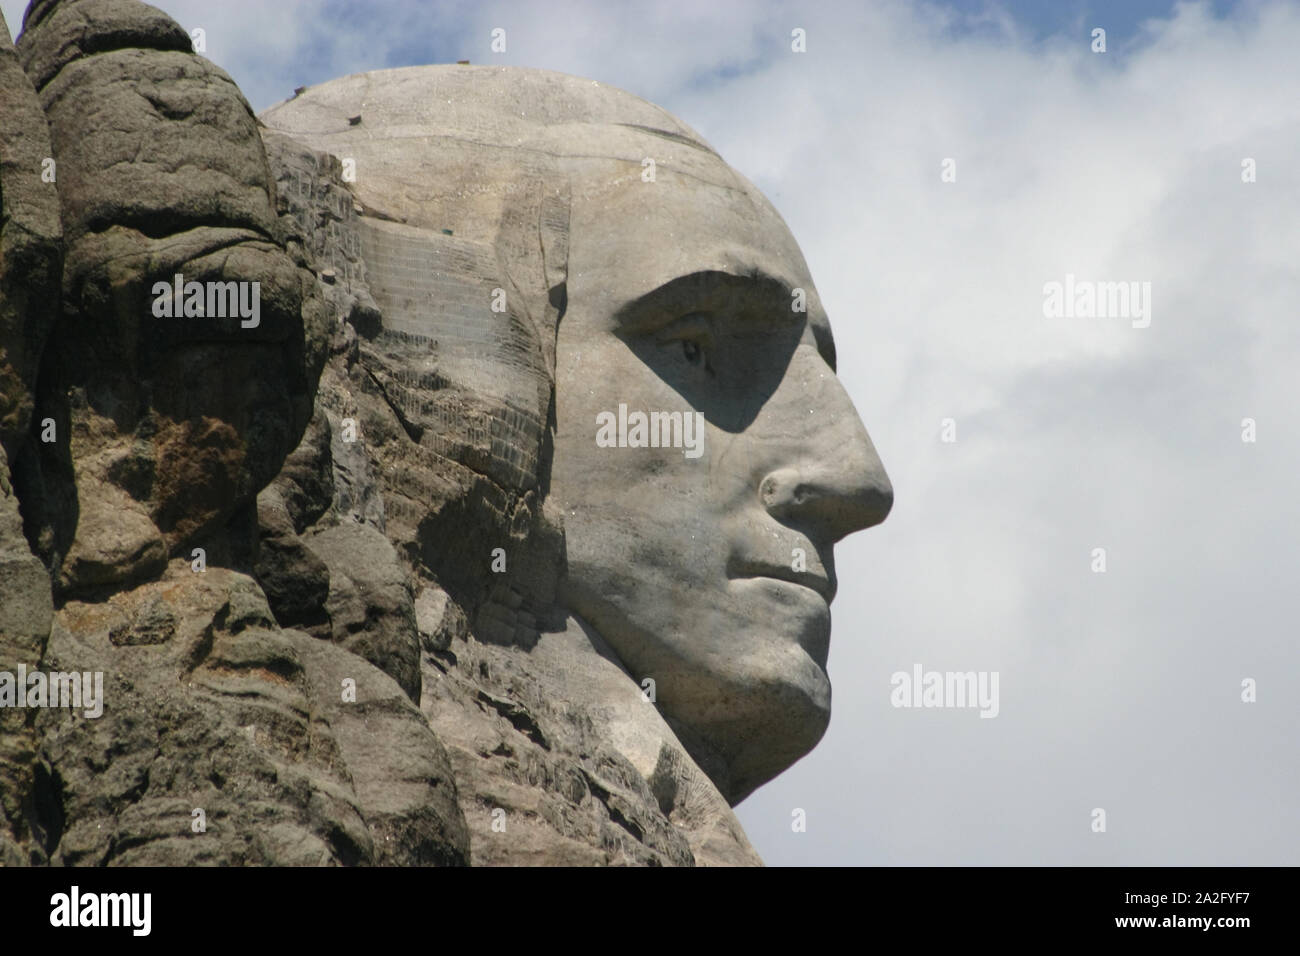 A side view of Mount Rushmore's President George Washington. Stock Photo